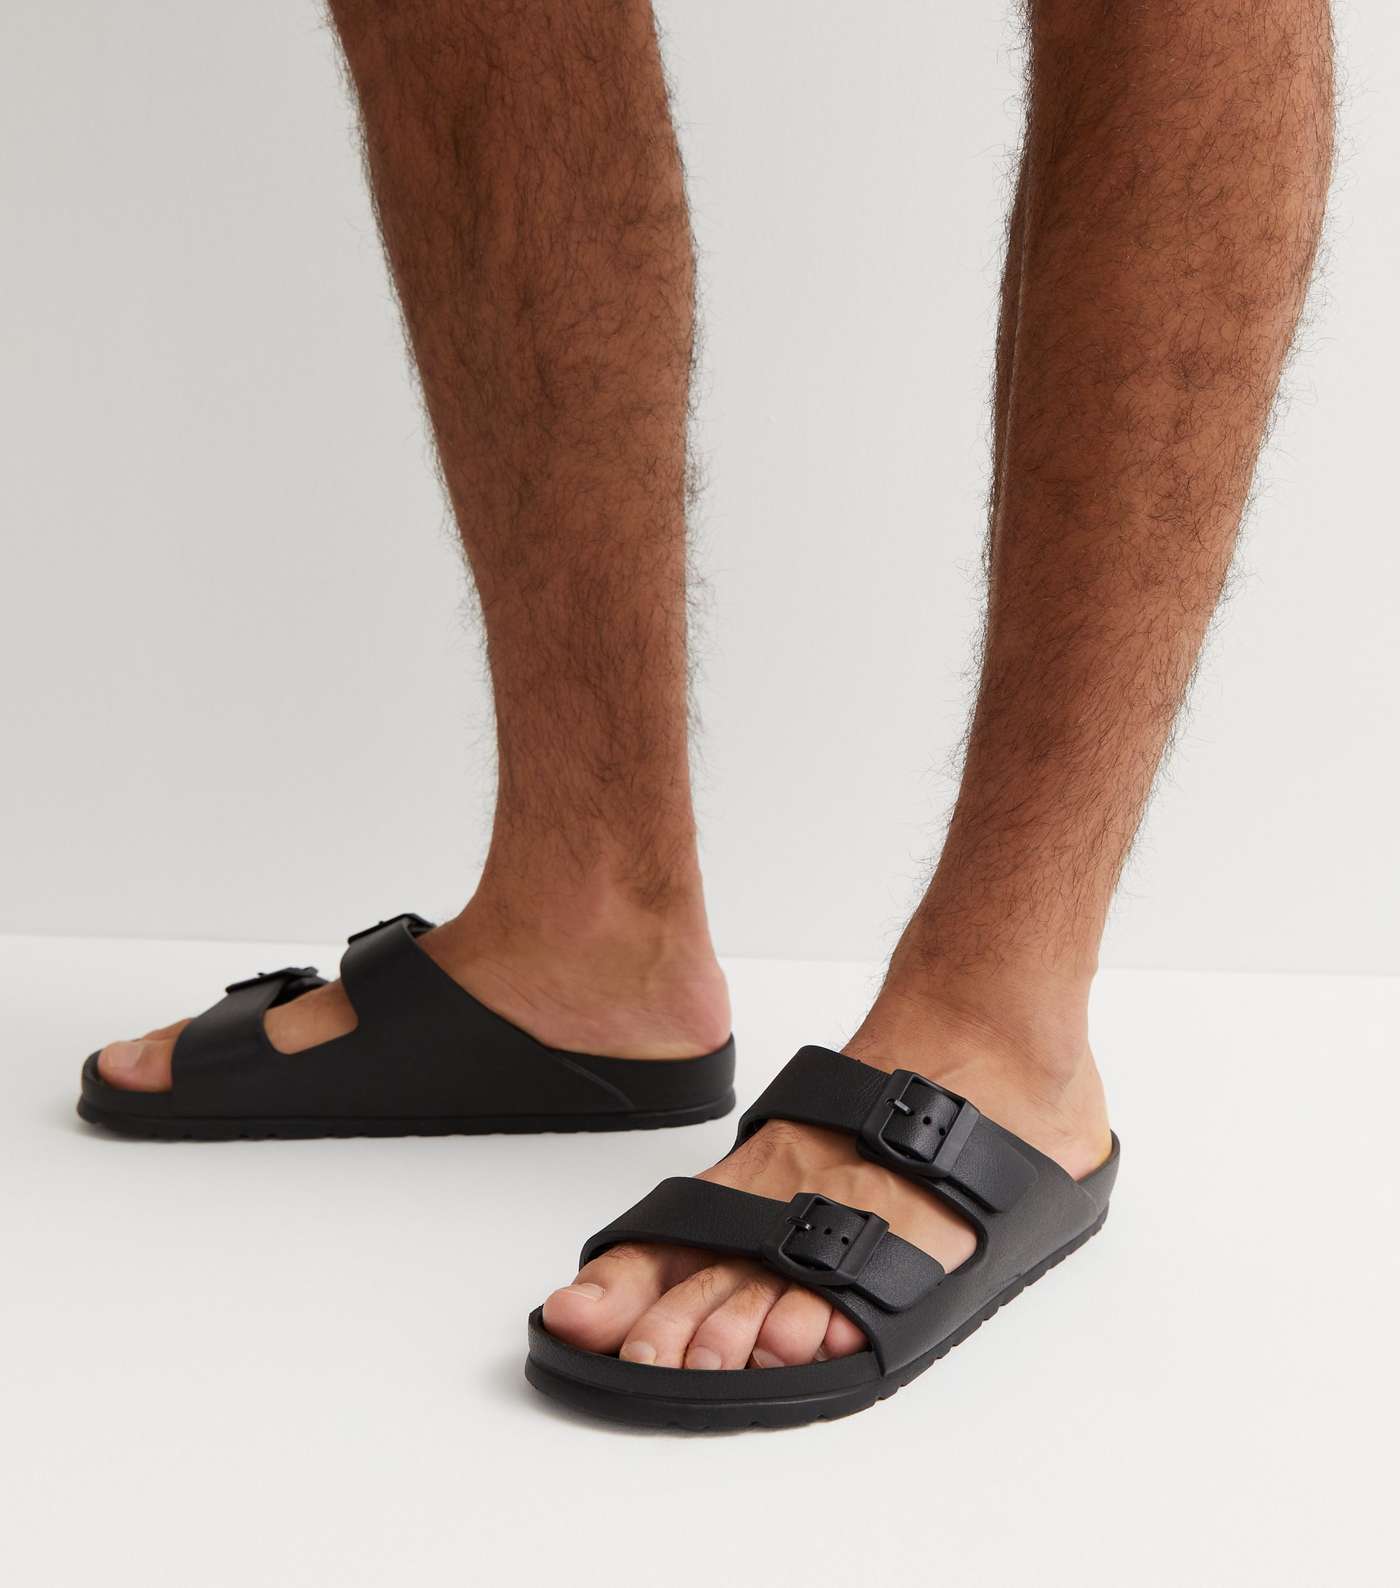 Black Double Buckle Strap Footbed Sliders Image 2